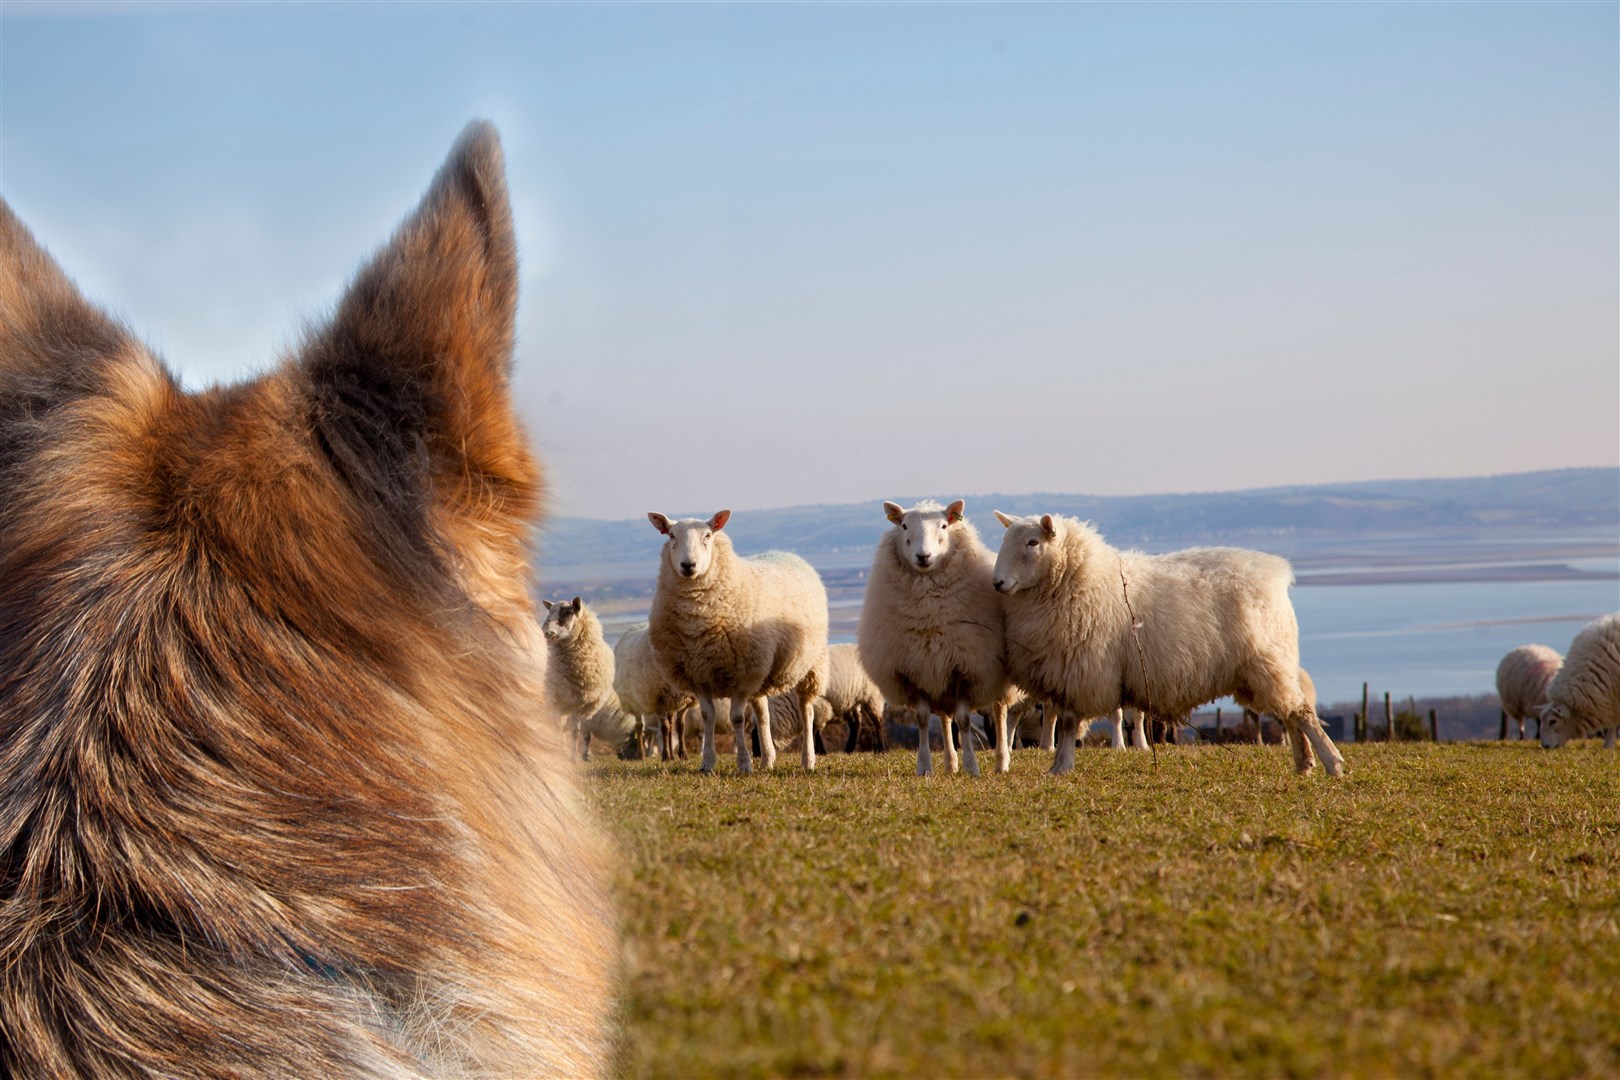 Dog owners can be fined or imprisoned if their pet attacks farm animals.